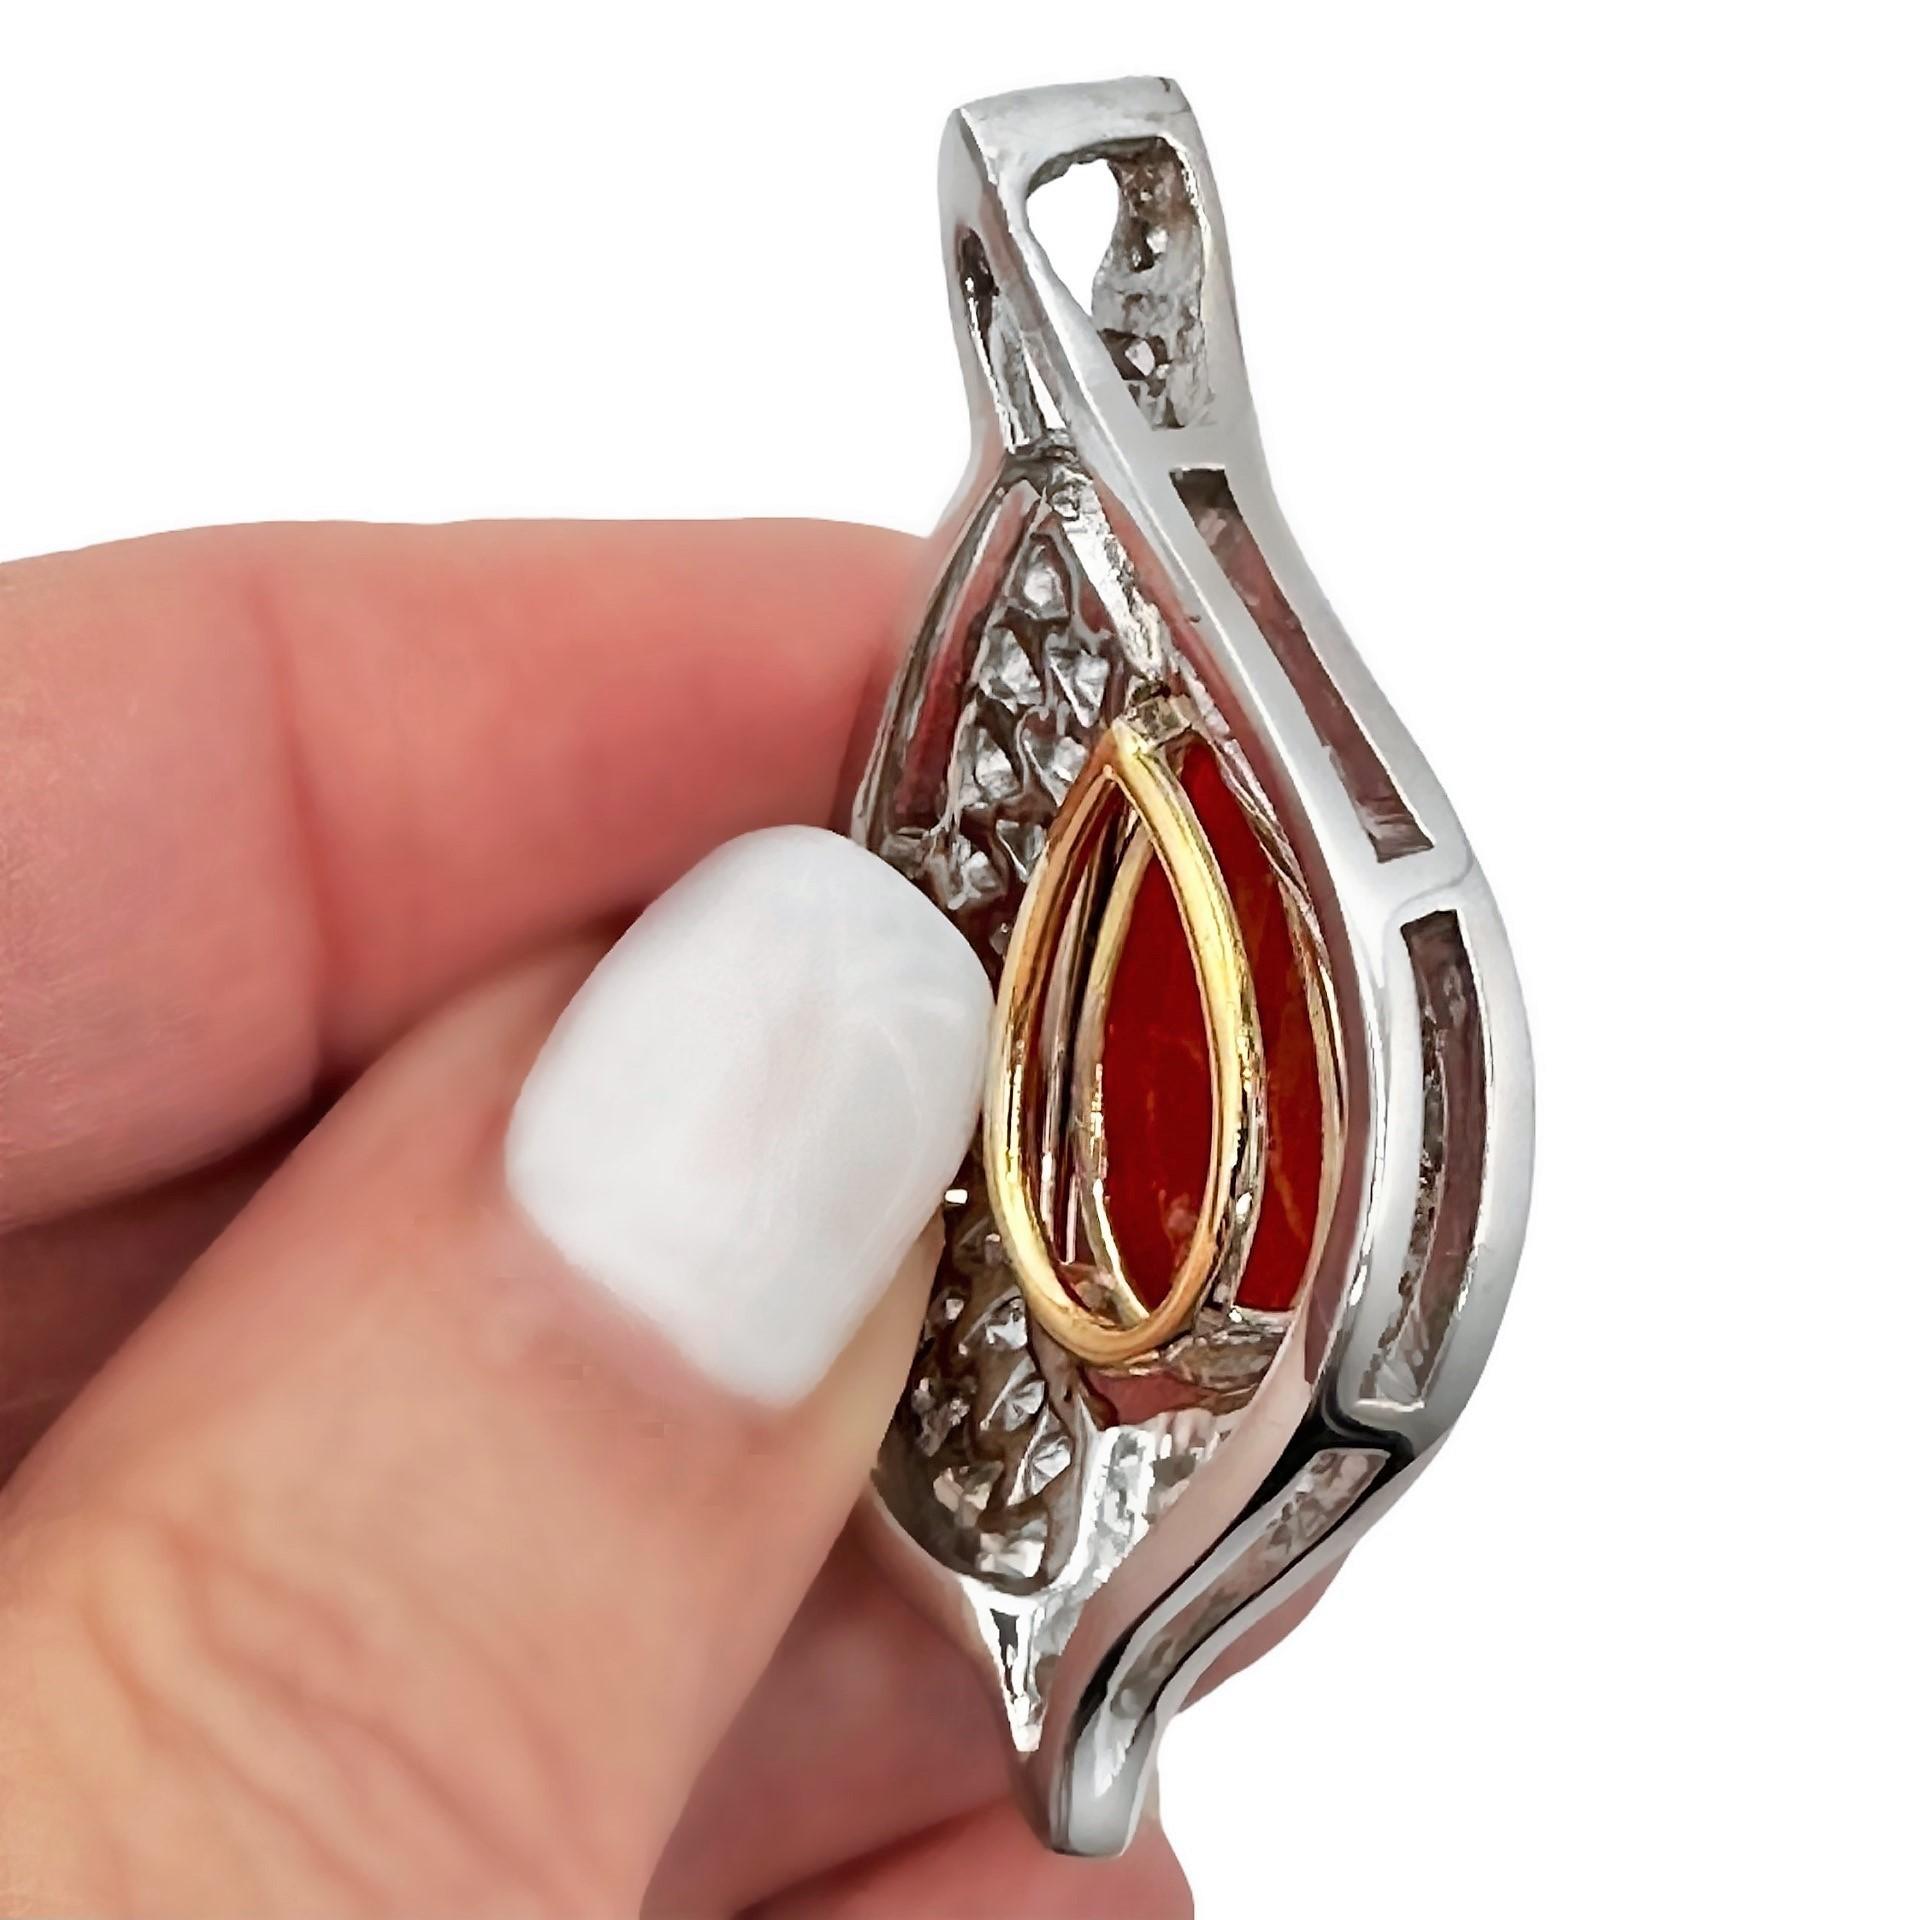 Women's Dramatic 18k Coral & Diamond Pendant By Emis Beros Shown on an Omega Choker For Sale